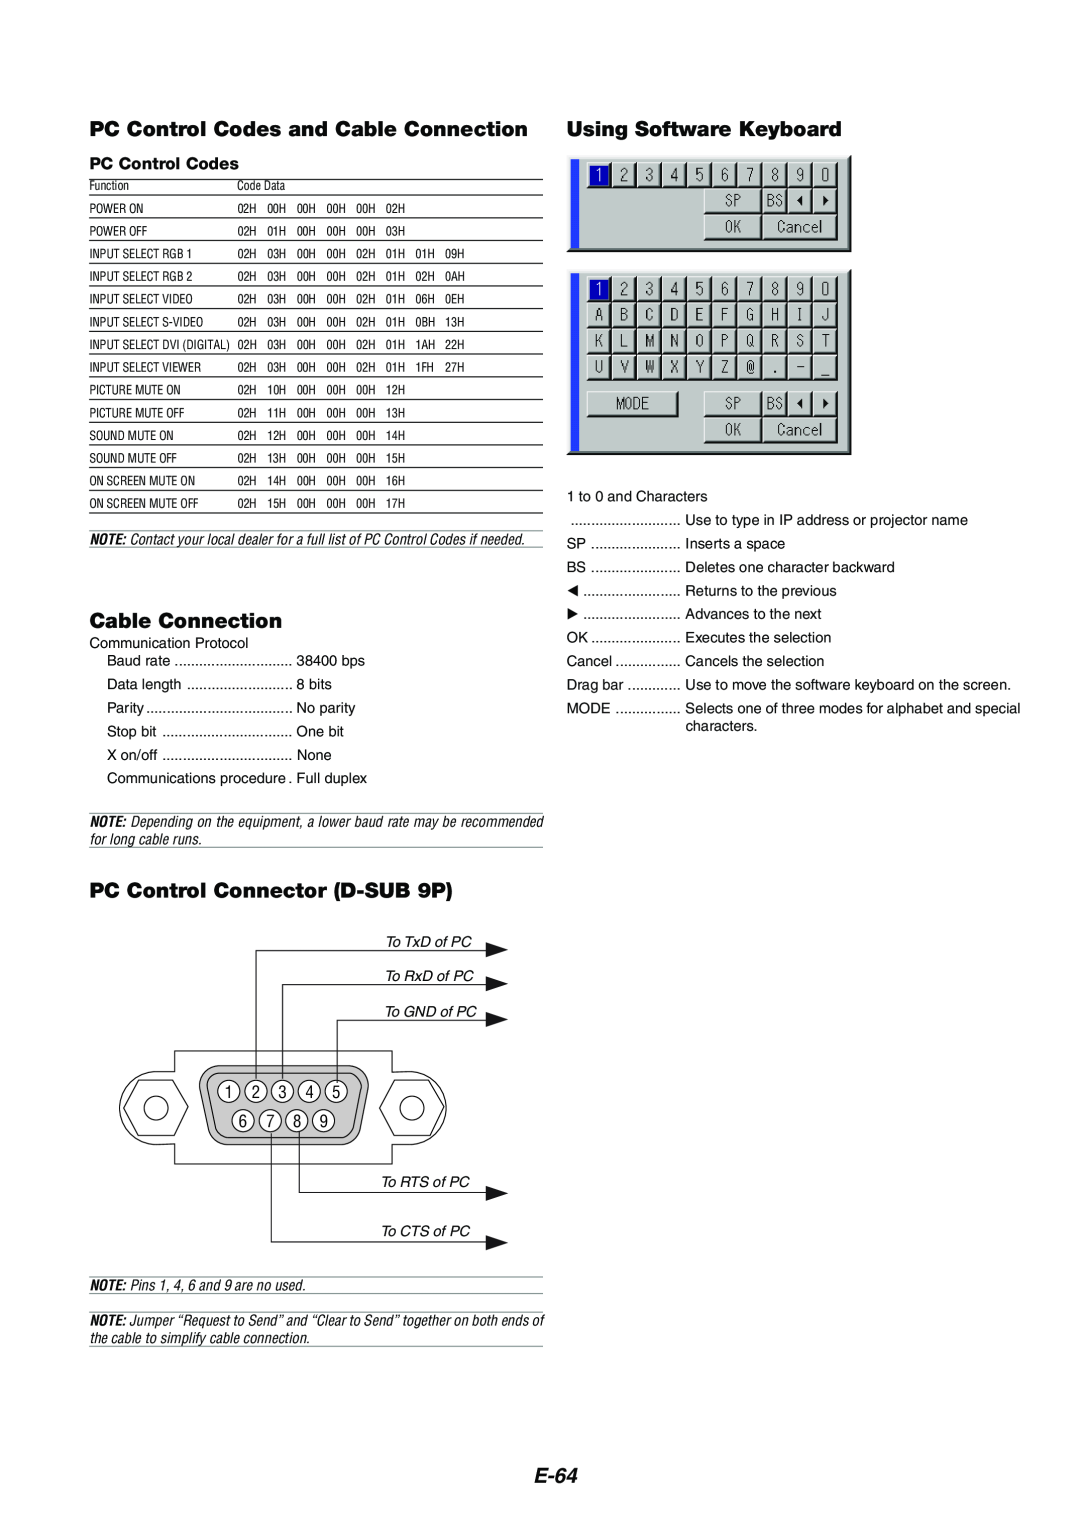 Kensington MT1075 PC Control Codes and Cable Connection, PC Control Connector D-SUB9P, Using Software Keyboard, E-64 